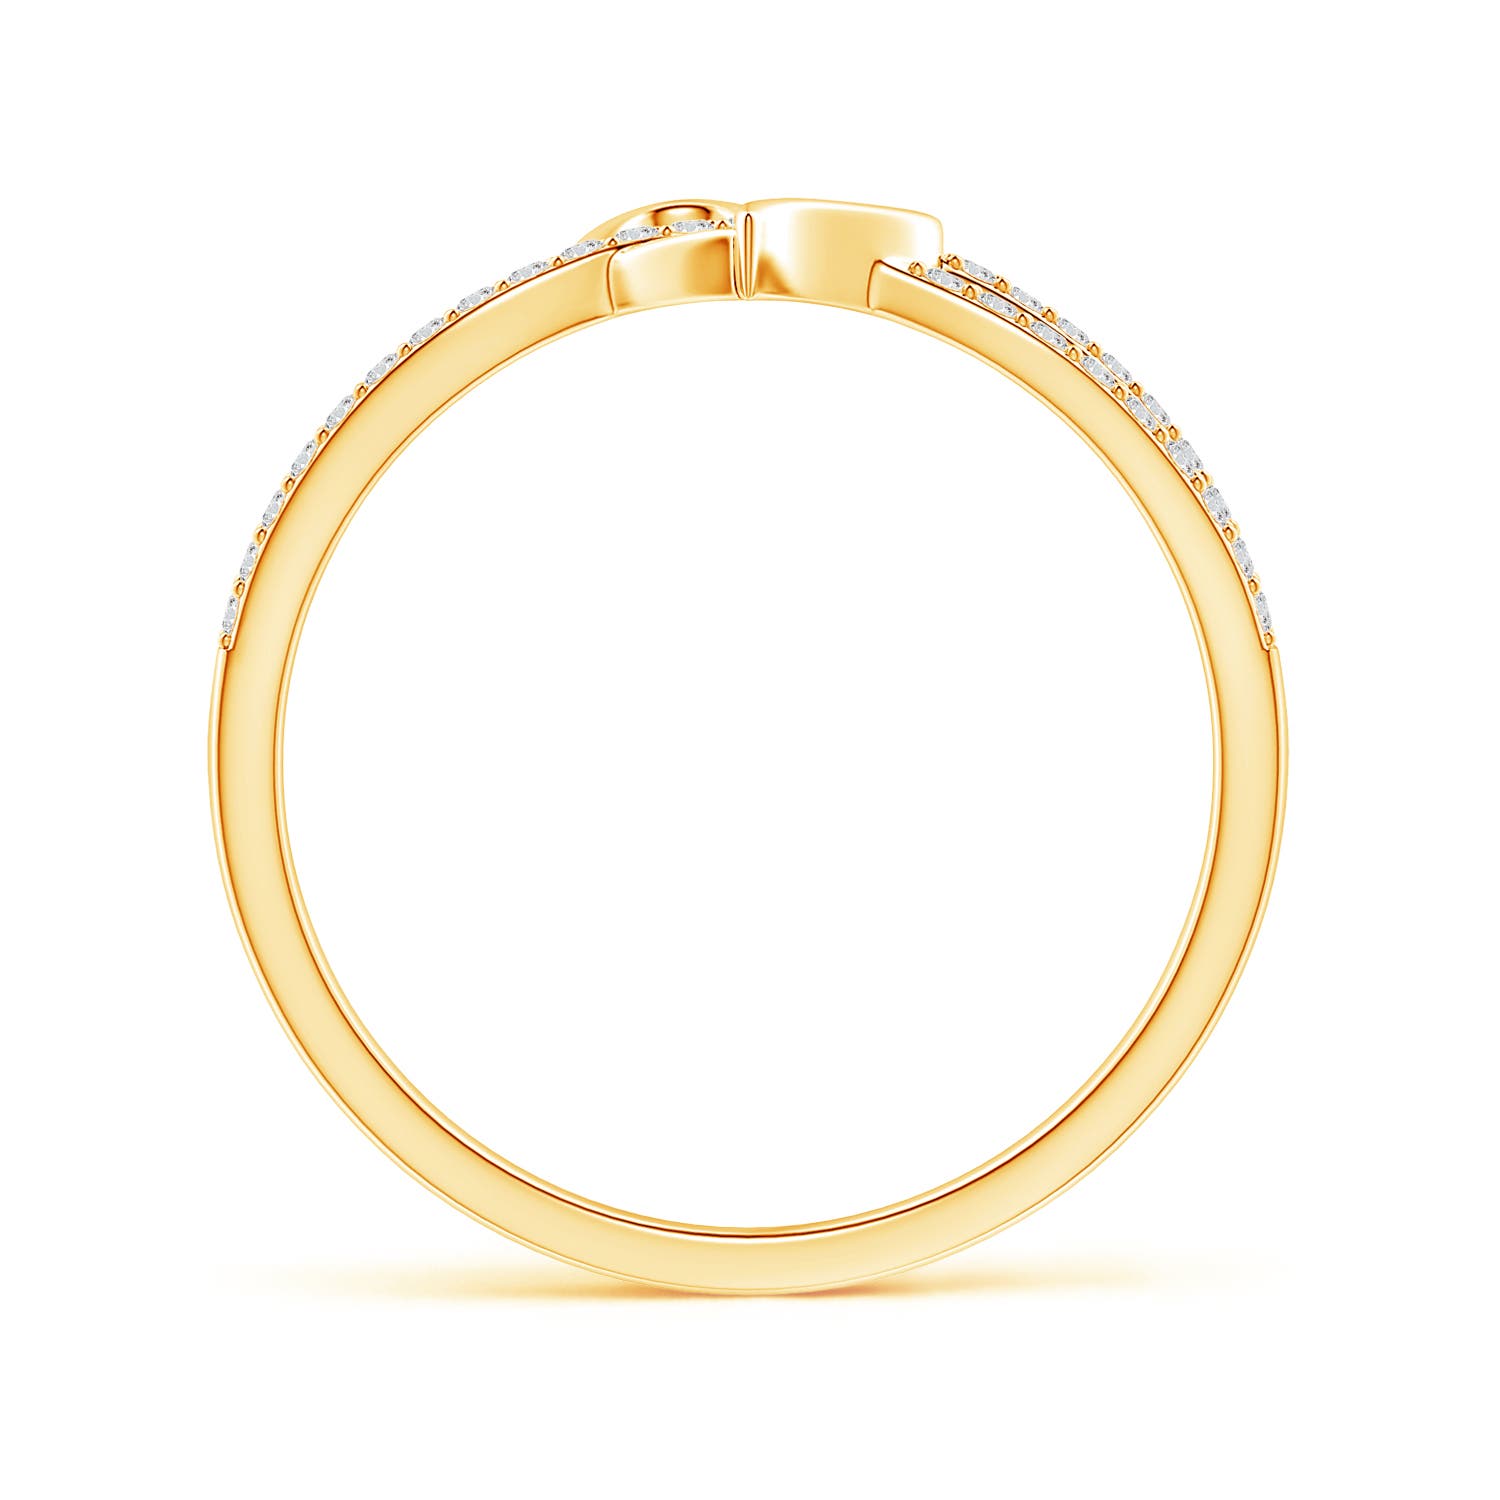 H, SI2 / 0.22 CT / 14 KT Yellow Gold